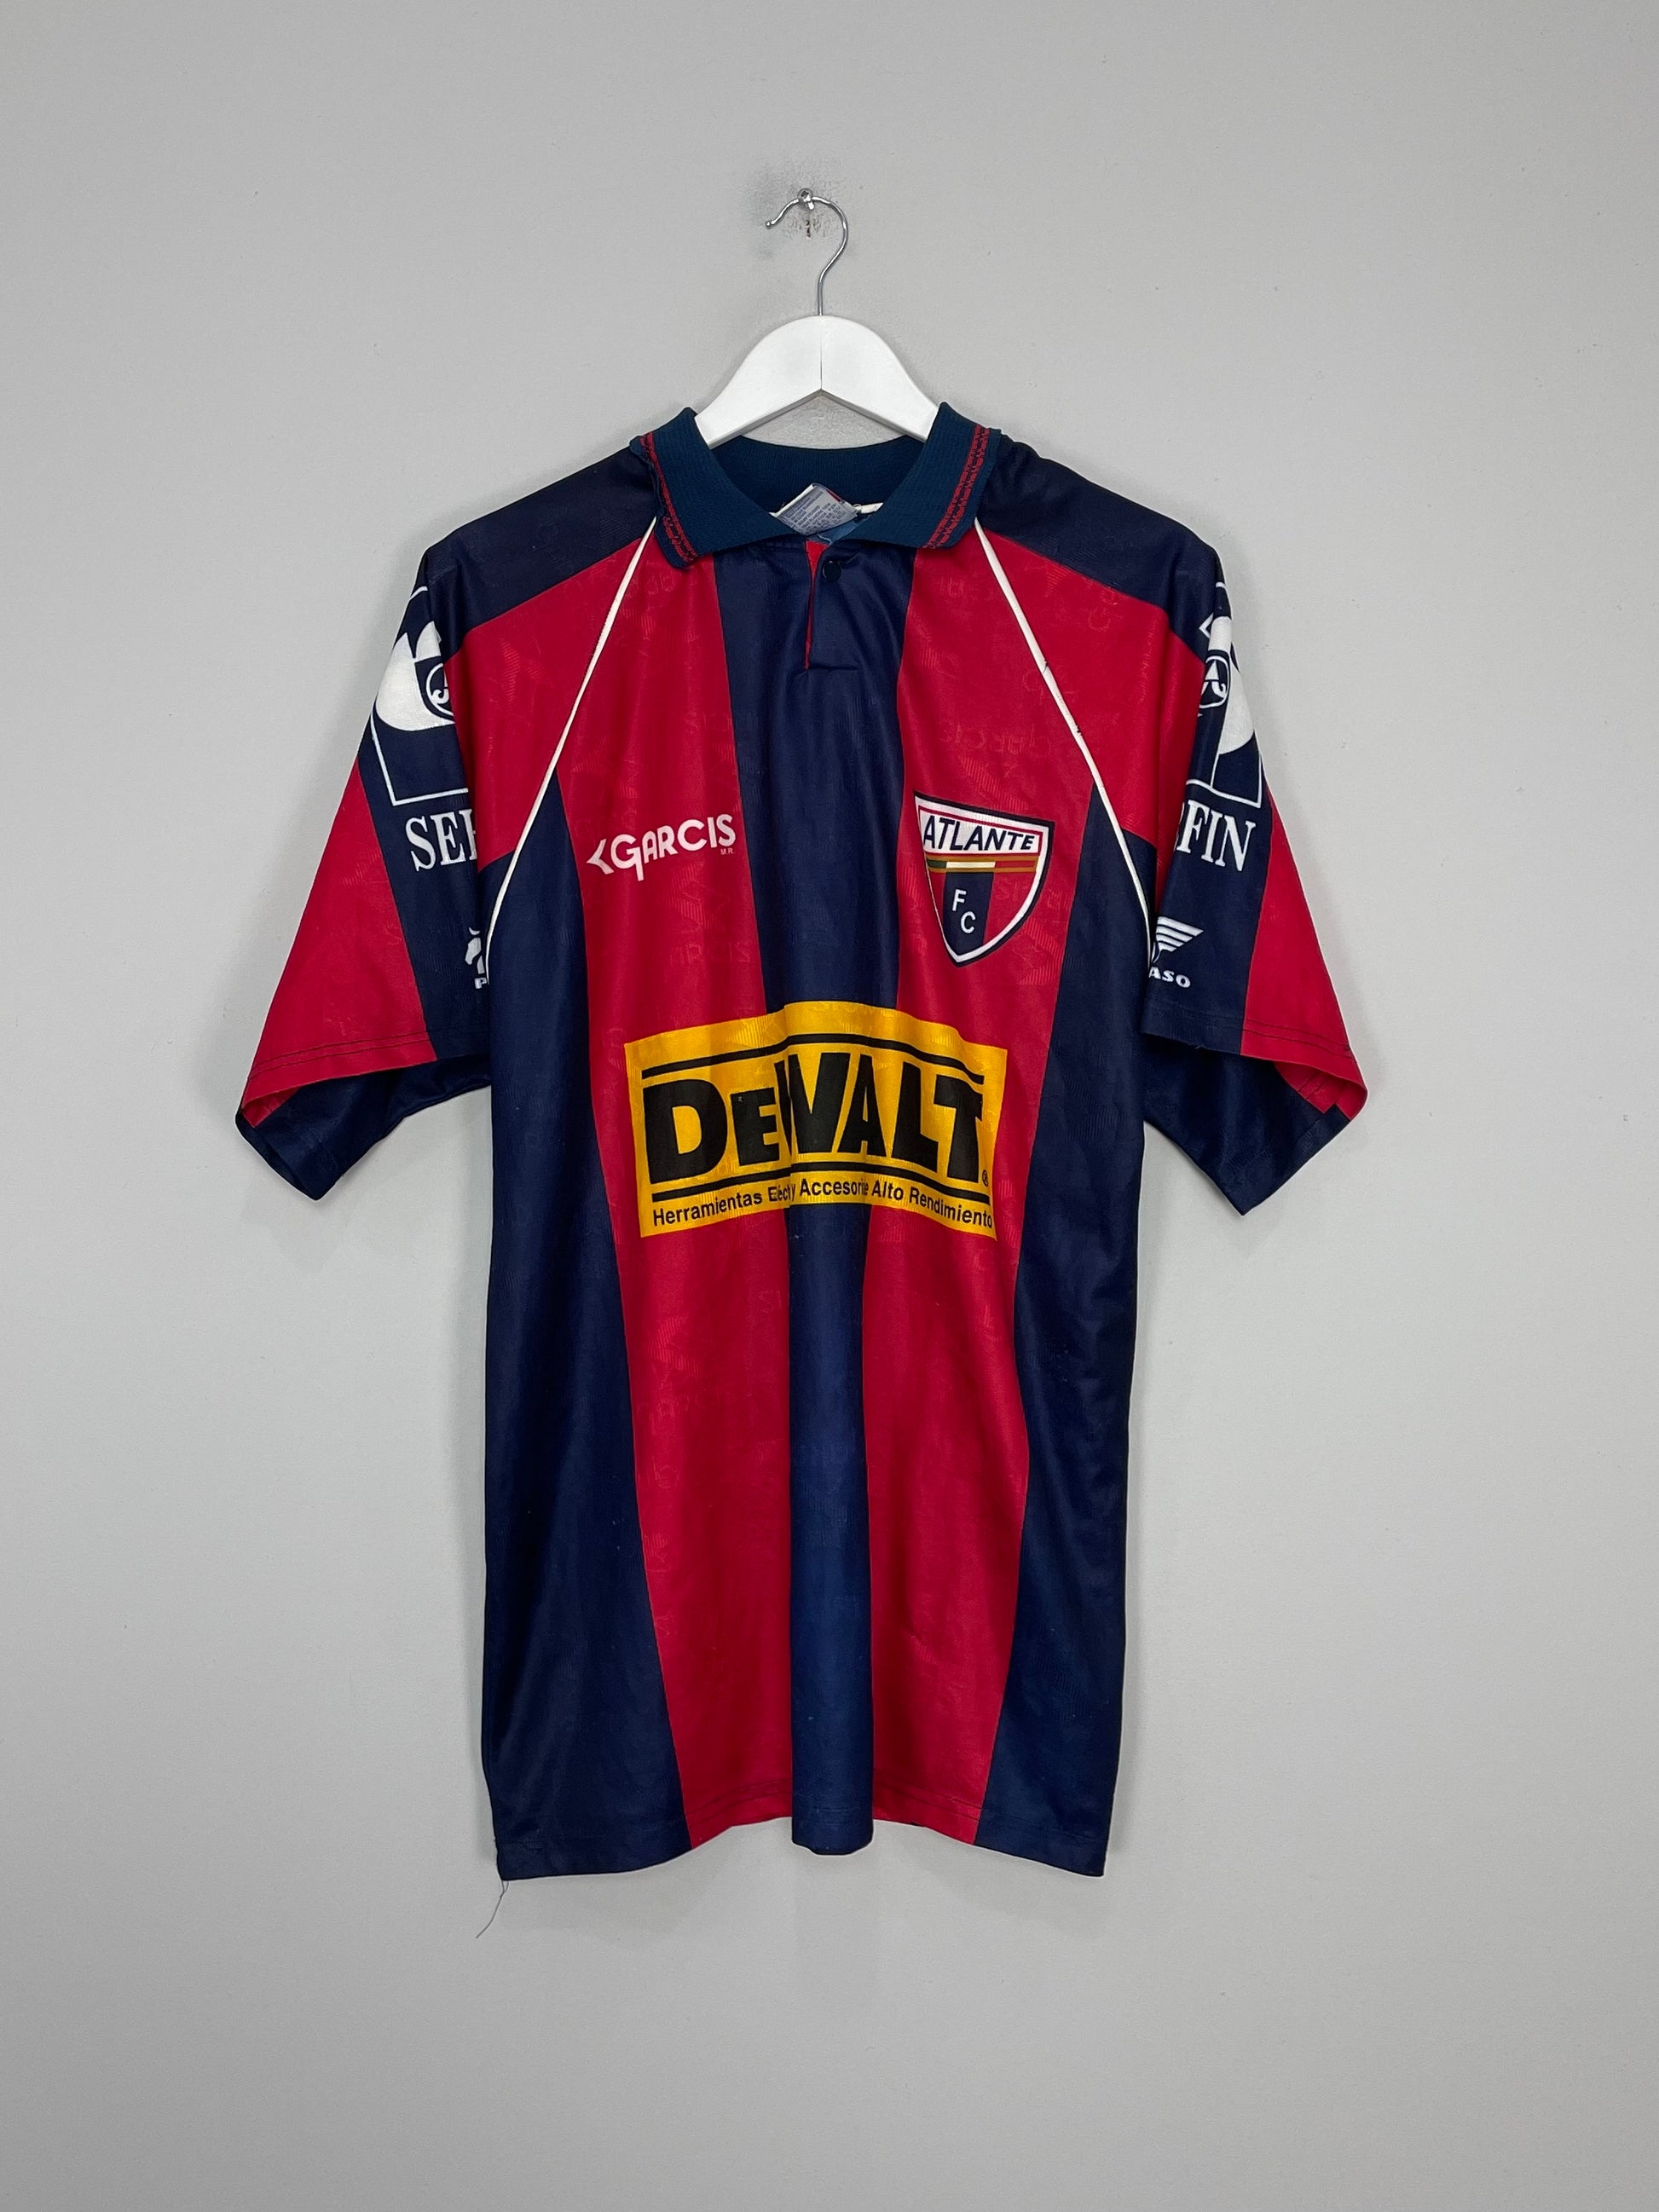 Image of the Atlante shirt from the 1997/98 season